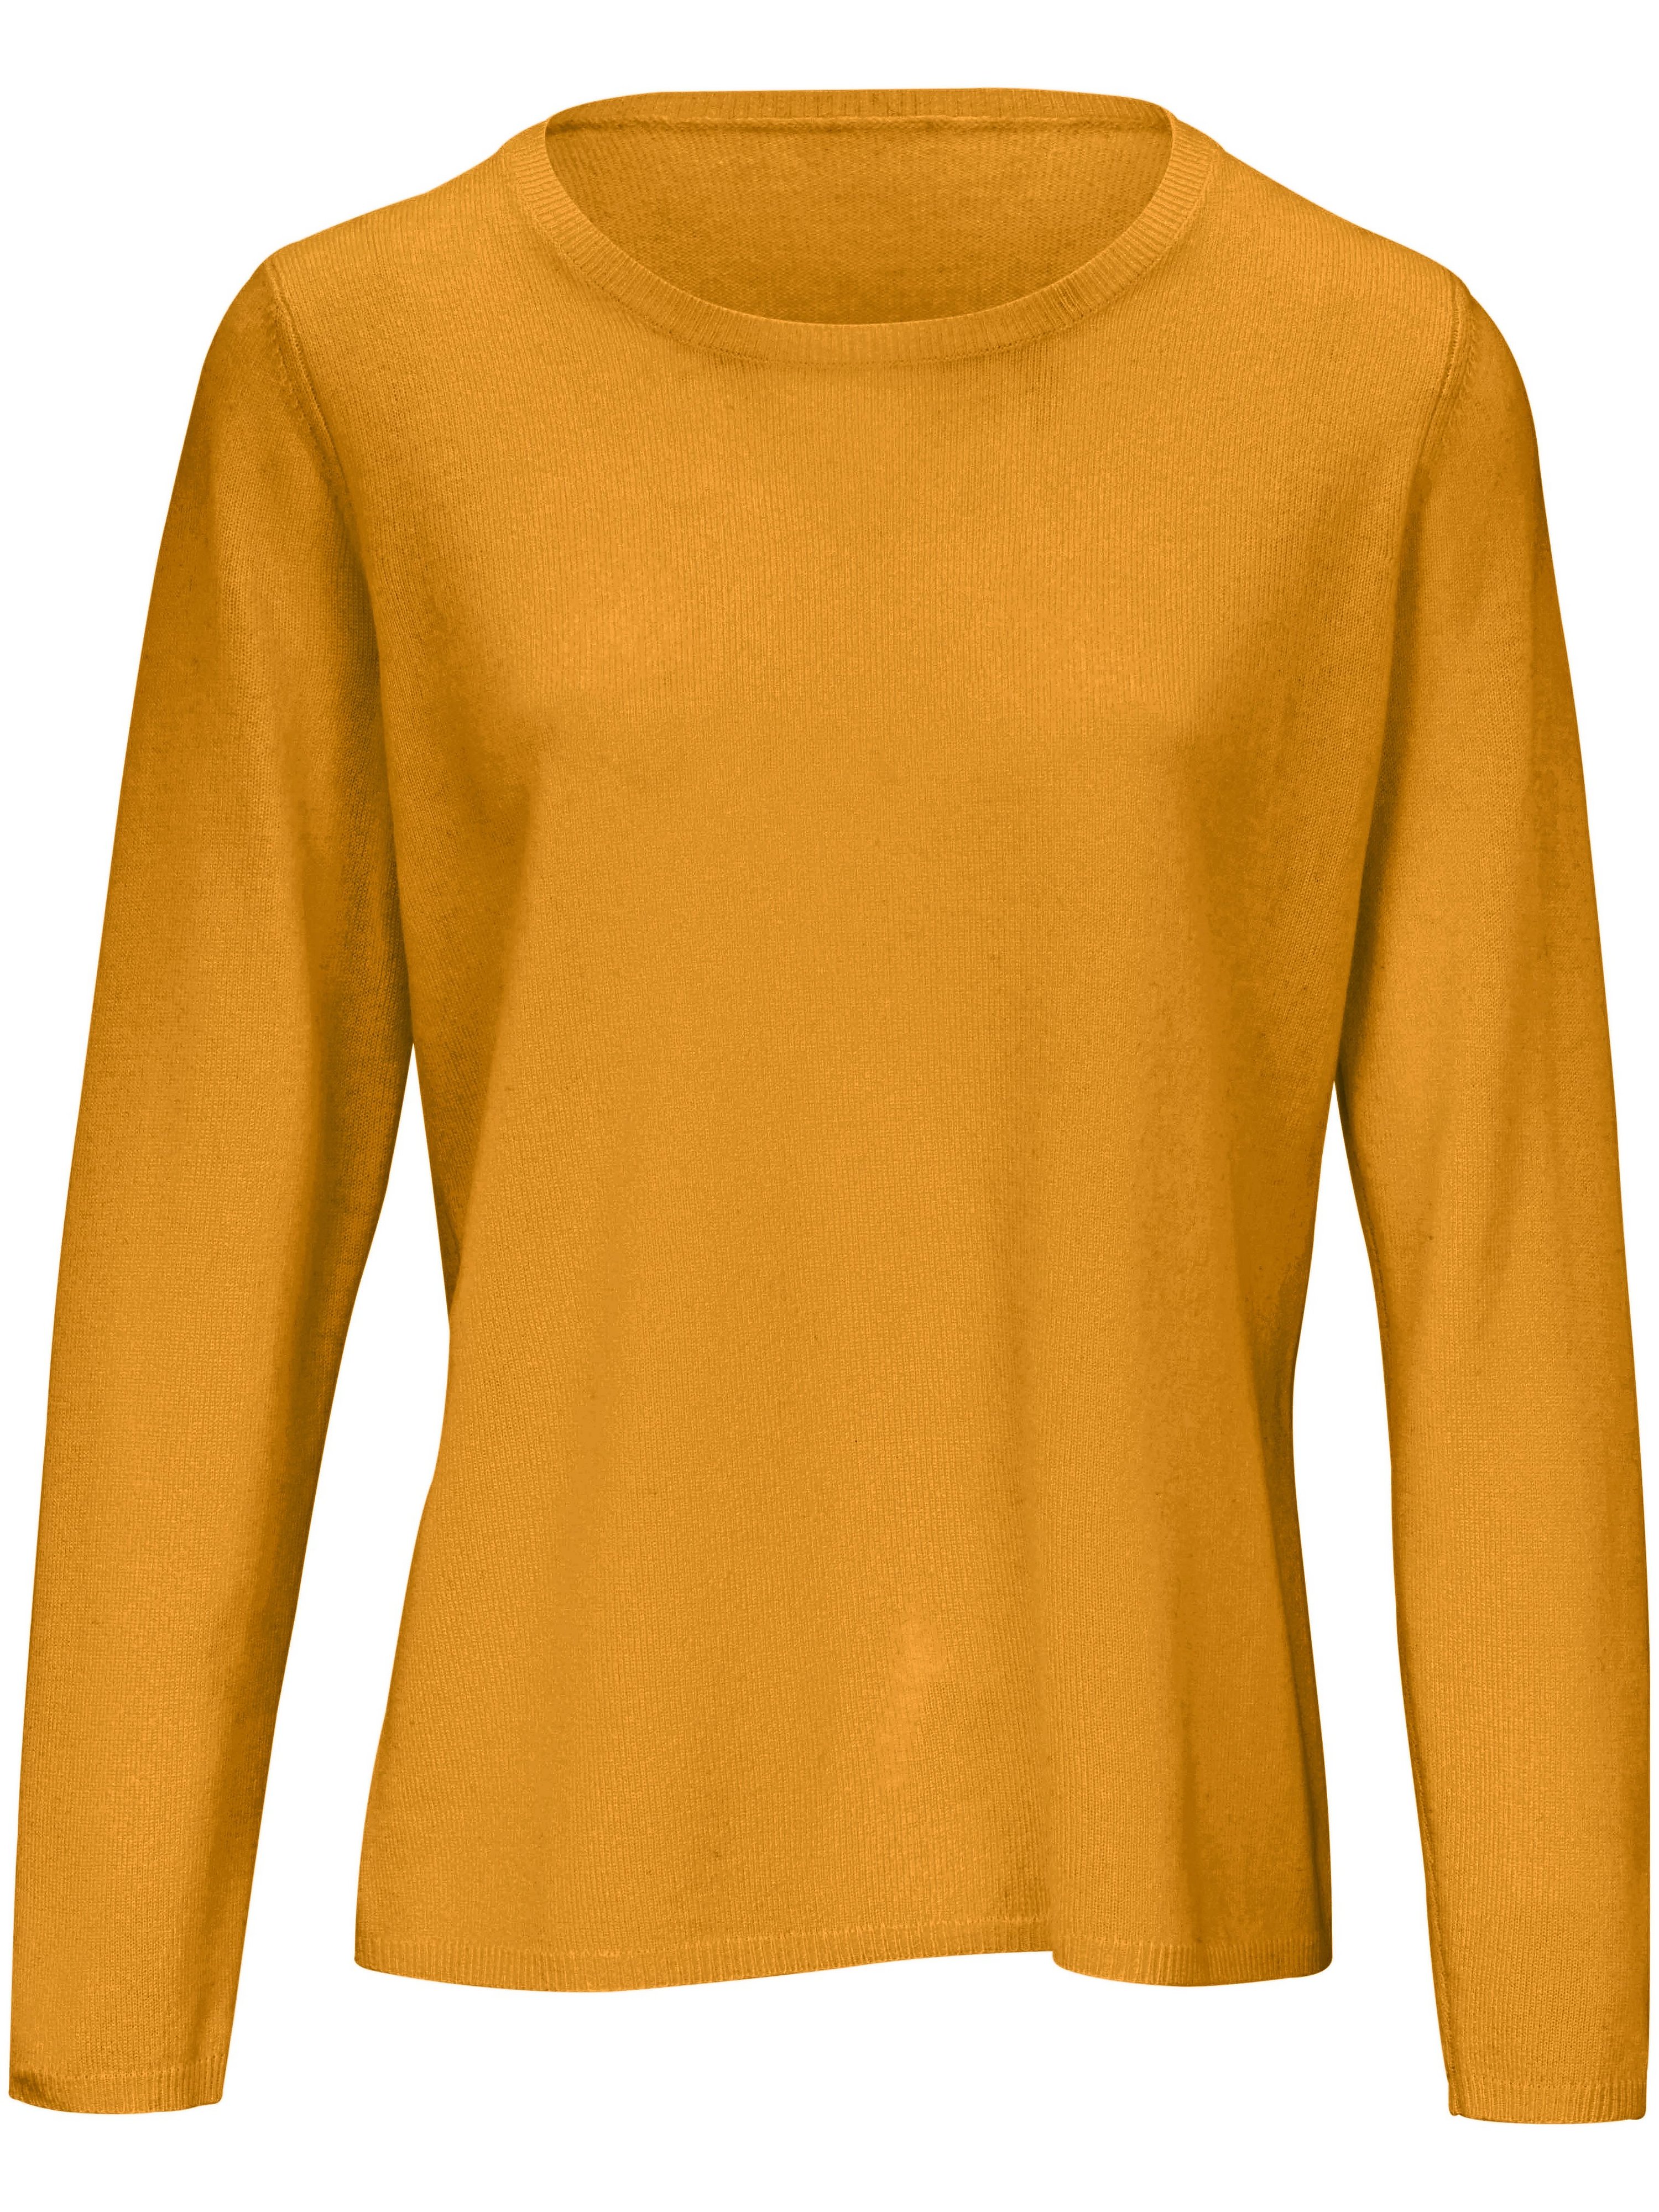 Le pull encolure ronde  include jaune taille 48